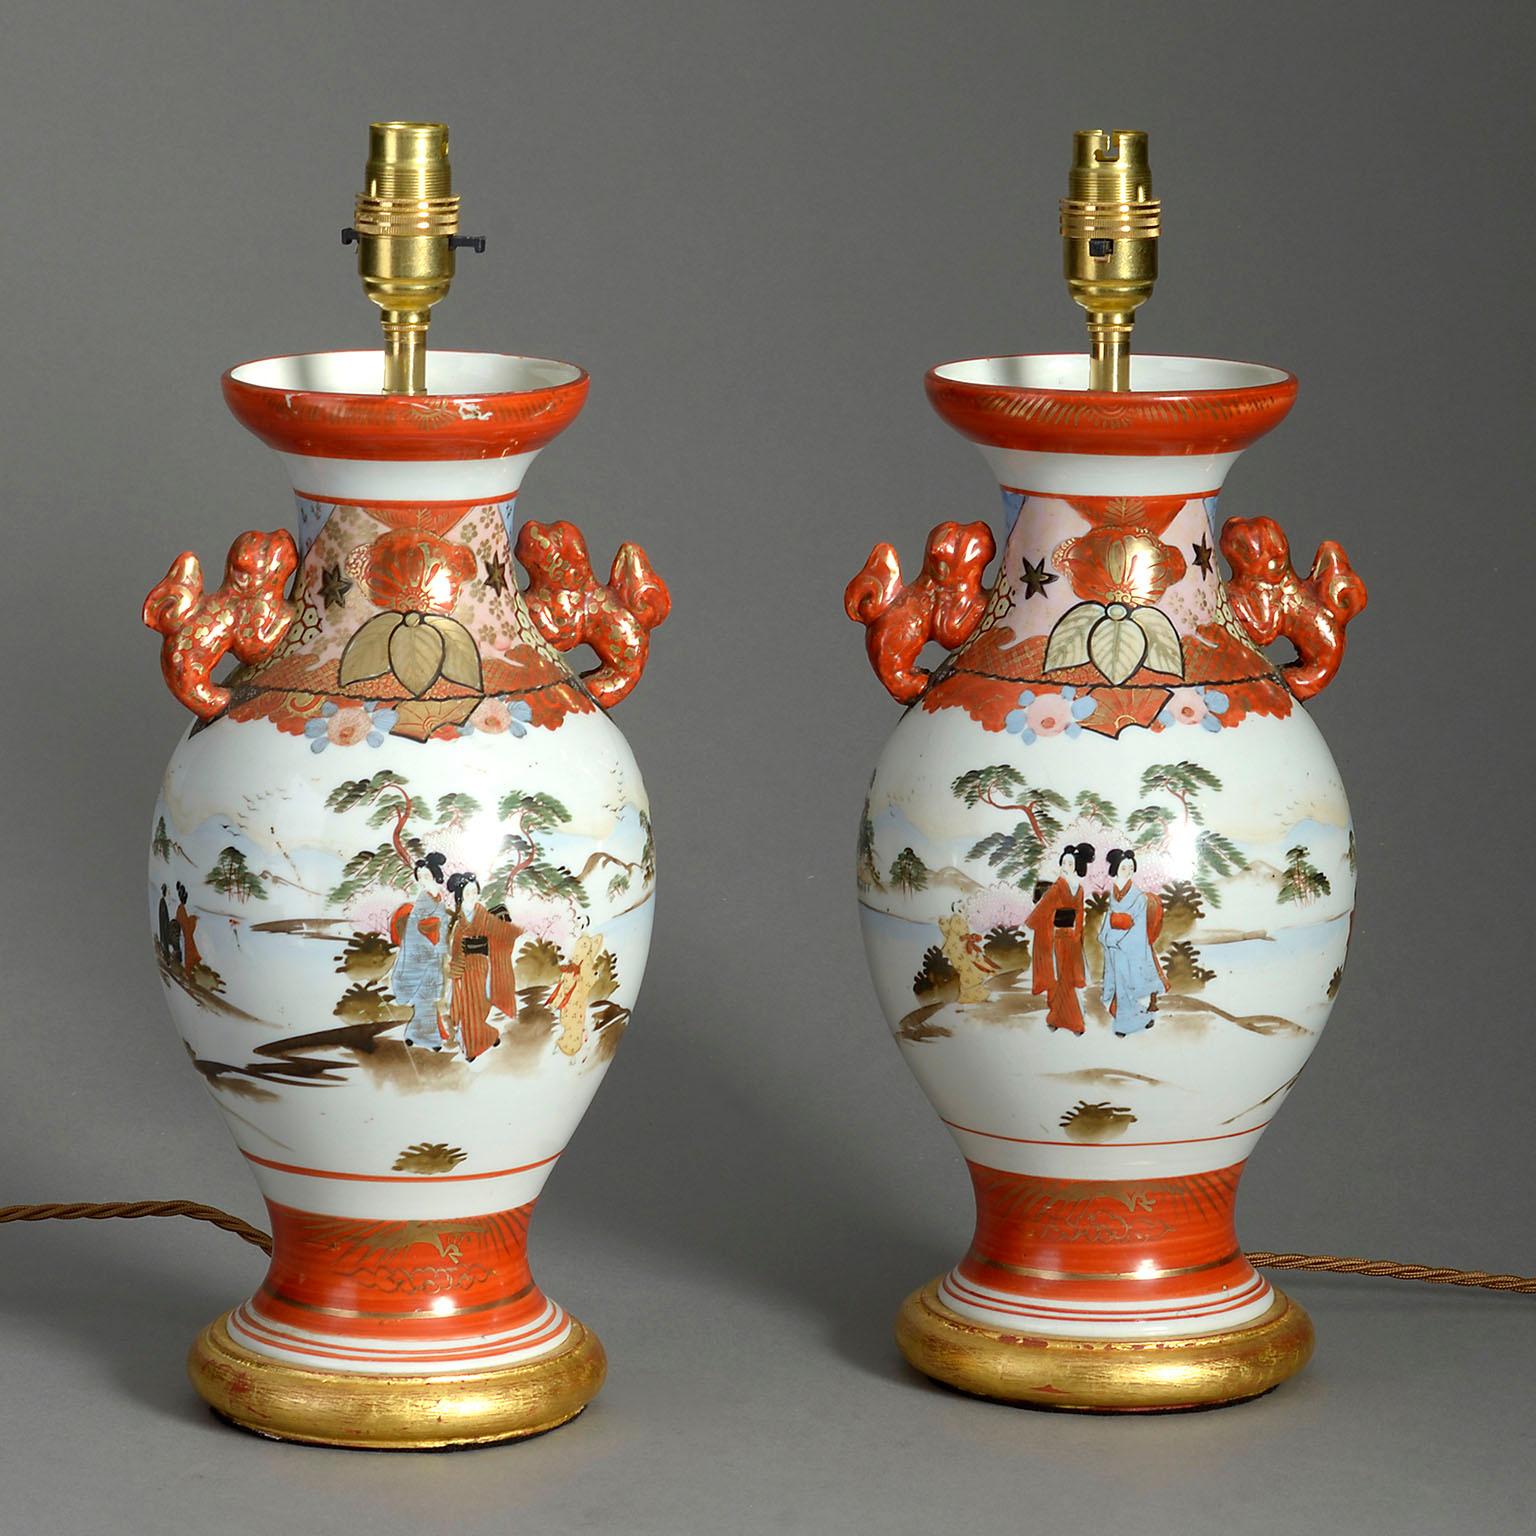 A pair of late 19th century orange glazed satsuma vases, each with handles and a bulbous body, decorated with courtly figures in landscapes. Now raised on turned giltwood bases as table lamps.

Meiji Period

Dimensions refer to vases and bases